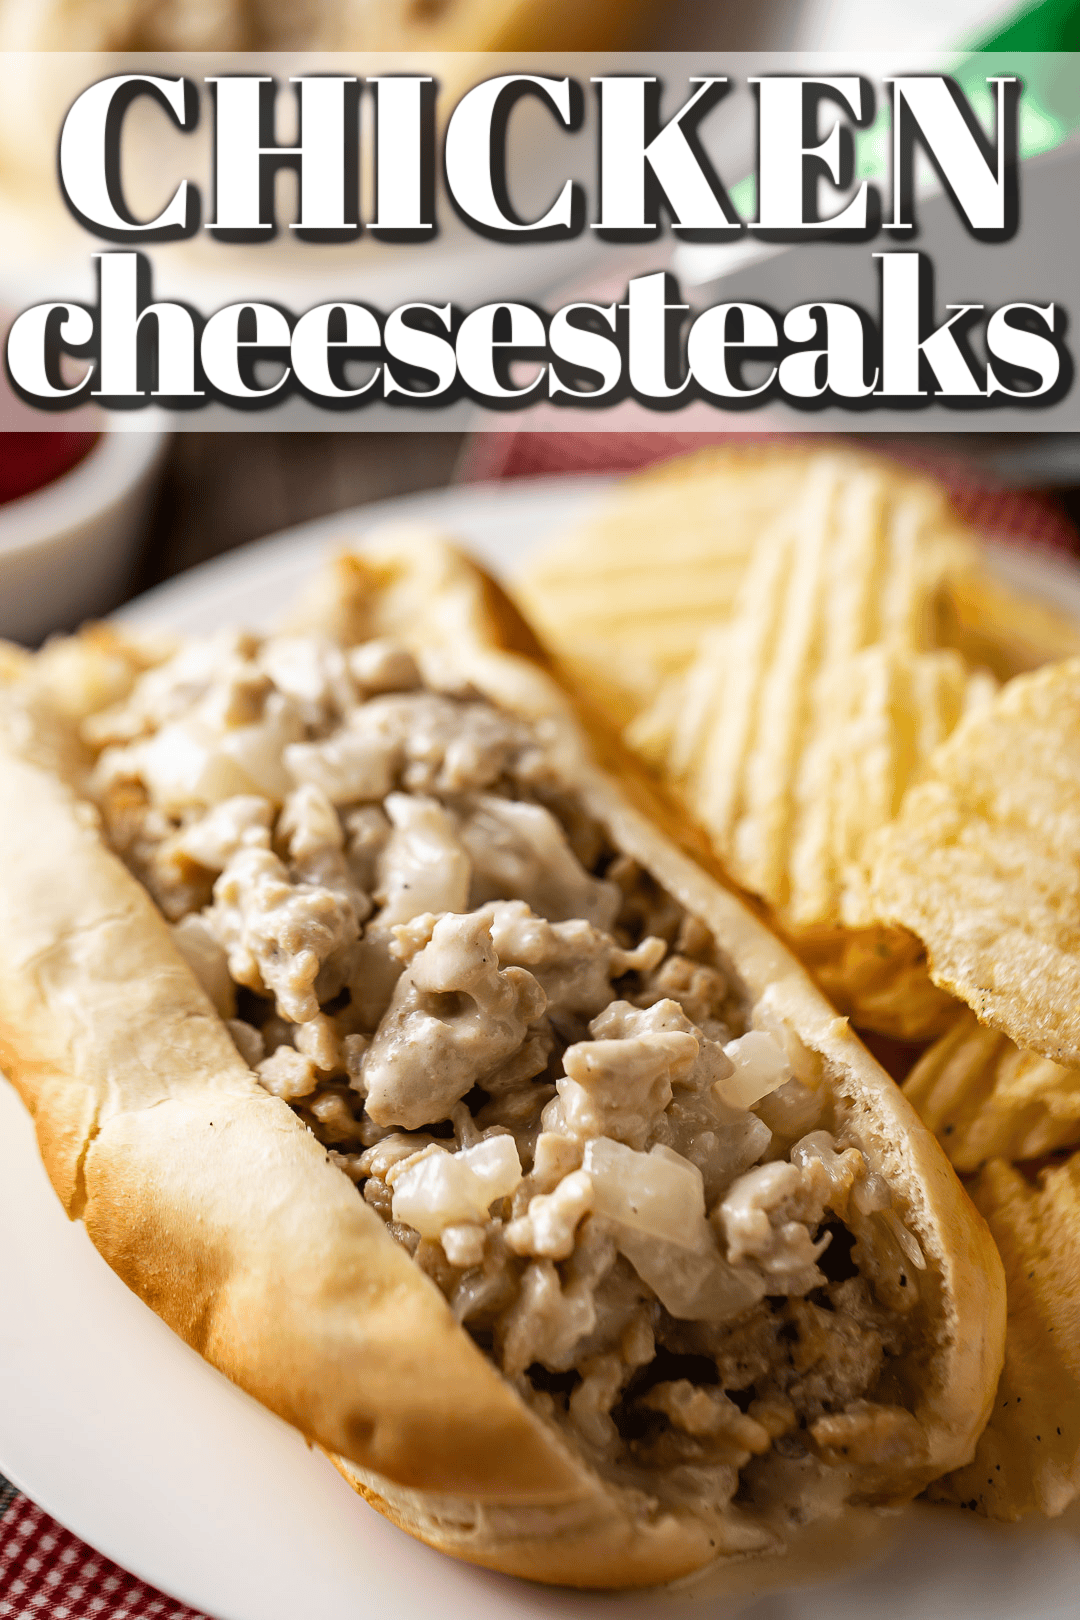 Chicken cheesesteak recipe prepared and served on a log roll with chips.